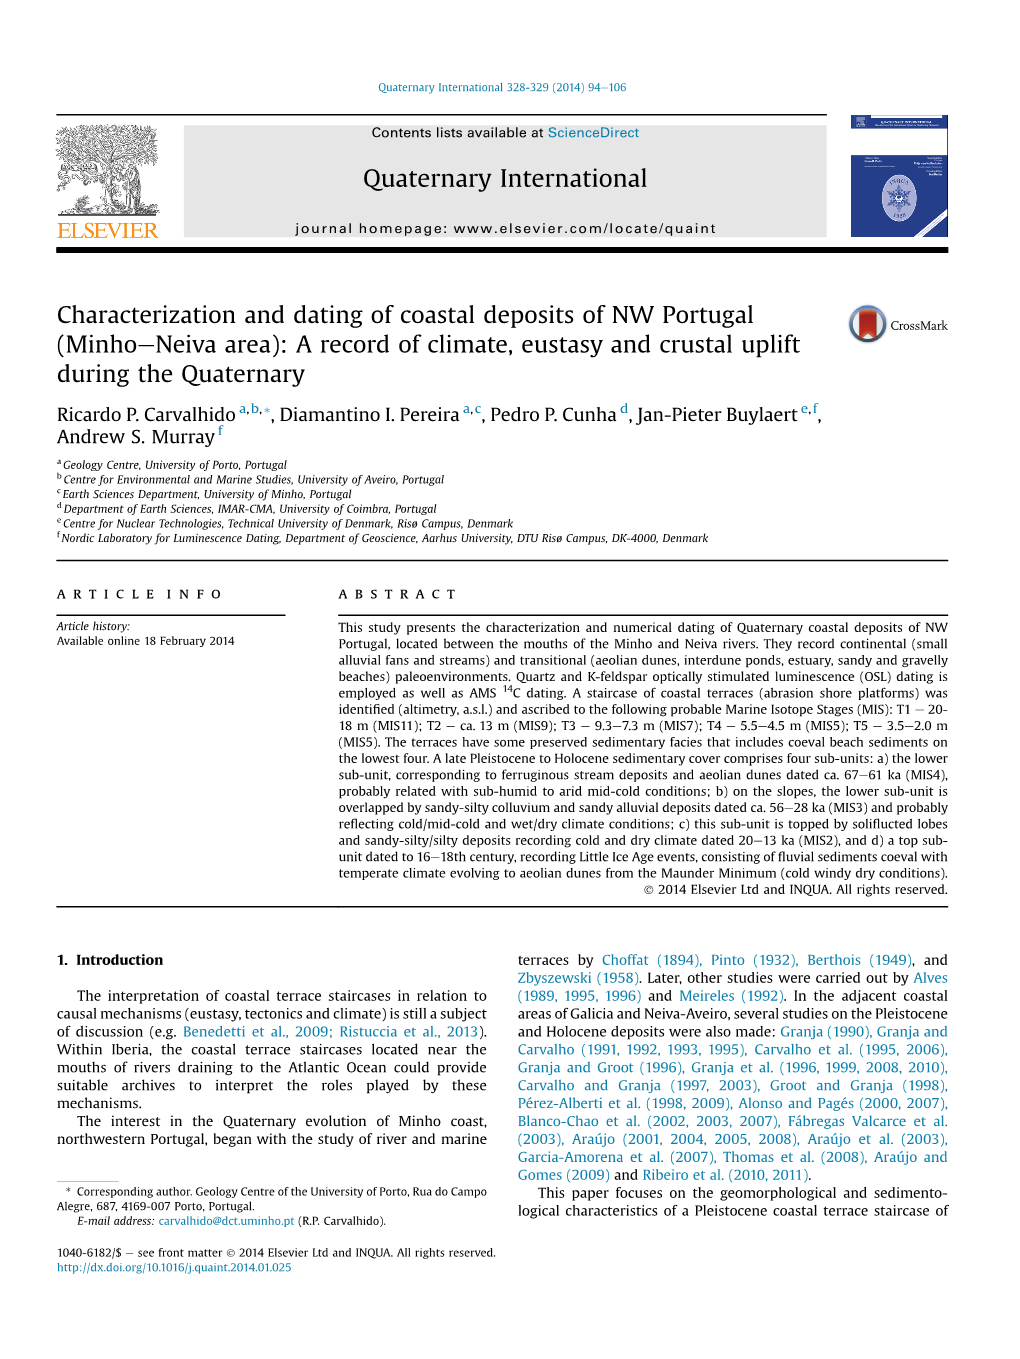 Characterization and Dating of Coastal Deposits of NW Portugal (Minhoeneiva Area): a Record of Climate, Eustasy and Crustal Uplift During the Quaternary